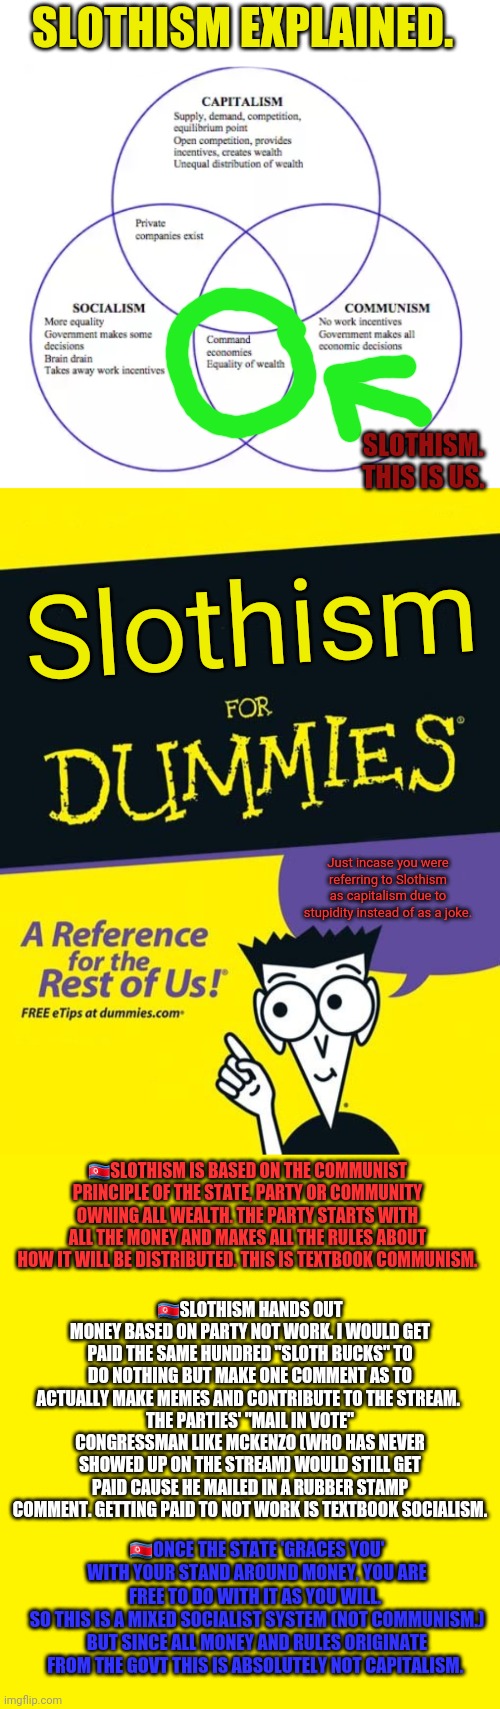 Slothism for dummies | SLOTHISM EXPLAINED. SLOTHISM. THIS IS US. Slothism; Just incase you were referring to Slothism as capitalism due to stupidity instead of as a joke. 🇰🇵SLOTHISM IS BASED ON THE COMMUNIST PRINCIPLE OF THE STATE, PARTY OR COMMUNITY OWNING ALL WEALTH. THE PARTY STARTS WITH ALL THE MONEY AND MAKES ALL THE RULES ABOUT HOW IT WILL BE DISTRIBUTED. THIS IS TEXTBOOK COMMUNISM. 🇰🇵SLOTHISM HANDS OUT MONEY BASED ON PARTY NOT WORK. I WOULD GET PAID THE SAME HUNDRED "SLOTH BUCKS" TO DO NOTHING BUT MAKE ONE COMMENT AS TO ACTUALLY MAKE MEMES AND CONTRIBUTE TO THE STREAM. 
THE PARTIES' "MAIL IN VOTE" CONGRESSMAN LIKE MCKENZO (WHO HAS NEVER SHOWED UP ON THE STREAM) WOULD STILL GET PAID CAUSE HE MAILED IN A RUBBER STAMP COMMENT. GETTING PAID TO NOT WORK IS TEXTBOOK SOCIALISM. 🇰🇵ONCE THE STATE 'GRACES YOU' WITH YOUR STAND AROUND MONEY, YOU ARE FREE TO DO WITH IT AS YOU WILL. 
SO THIS IS A MIXED SOCIALIST SYSTEM (NOT COMMUNISM.) BUT SINCE ALL MONEY AND RULES ORIGINATE FROM THE GOVT THIS IS ABSOLUTELY NOT CAPITALISM. | image tagged in for dummies book,yellow background,slothism,communism,socialism,not capitalism | made w/ Imgflip meme maker